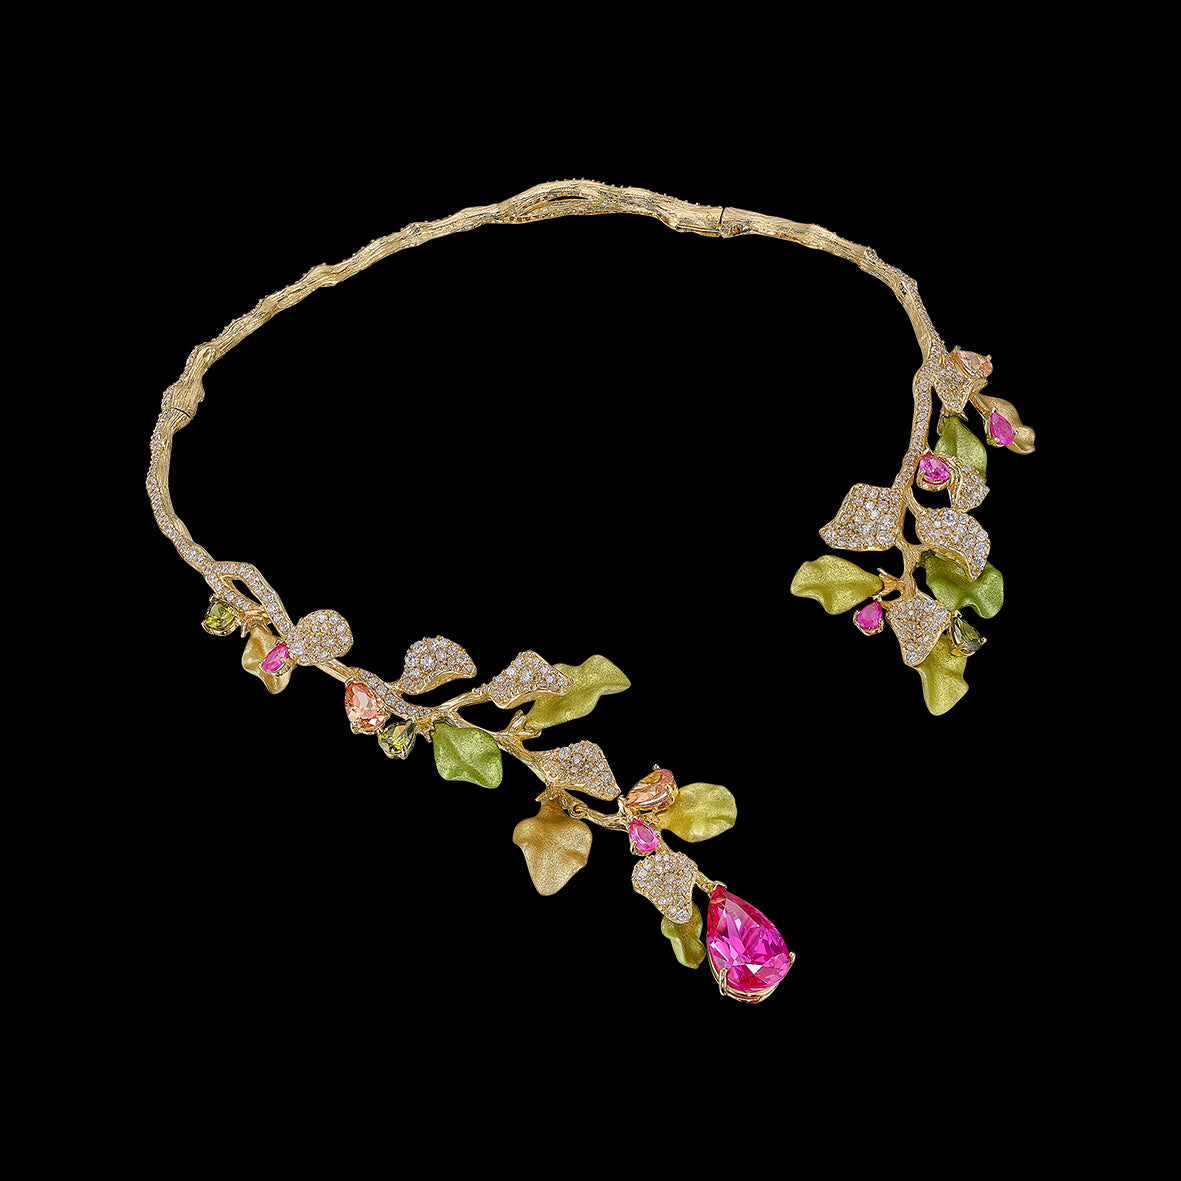 Lemon Fuchsia Thea Collar, Necklace, Anabela Chan Joaillerie - Fine jewelry with laboratory grown and created gemstones hand-crafted in the United Kingdom. Anabela Chan Joaillerie is the first fine jewellery brand in the world to champion laboratory-grown and created gemstones with high jewellery design, artisanal craftsmanship and a focus on ethical and sustainable innovations.